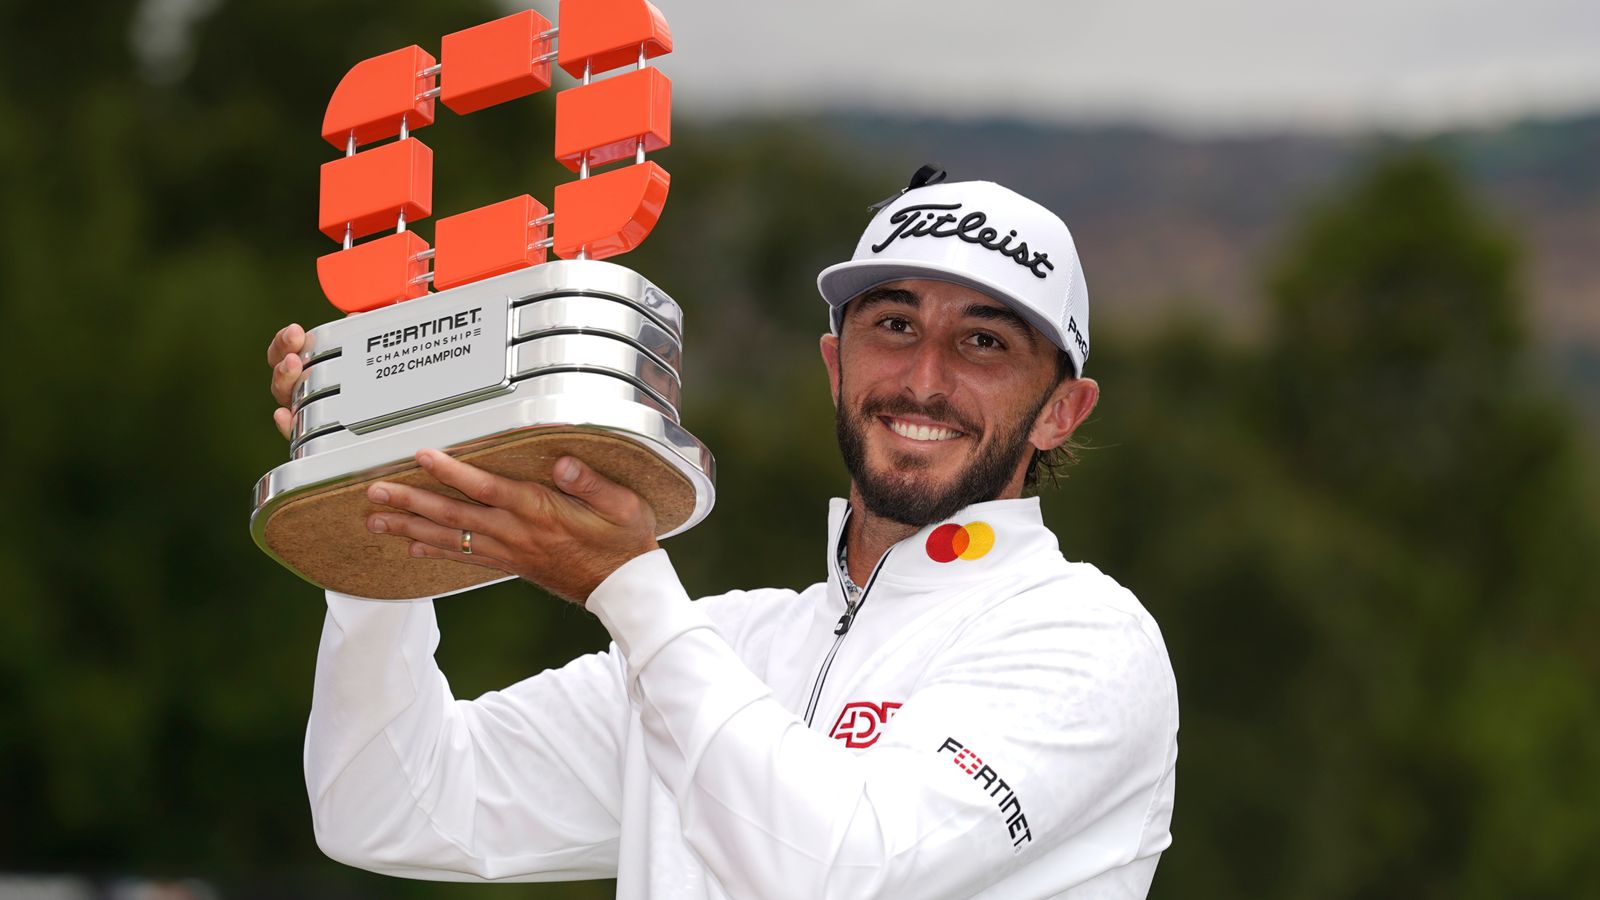 PGA Tour: Max Homa wins Fortinet Championship after Danny Willett three-putt on 18th hole